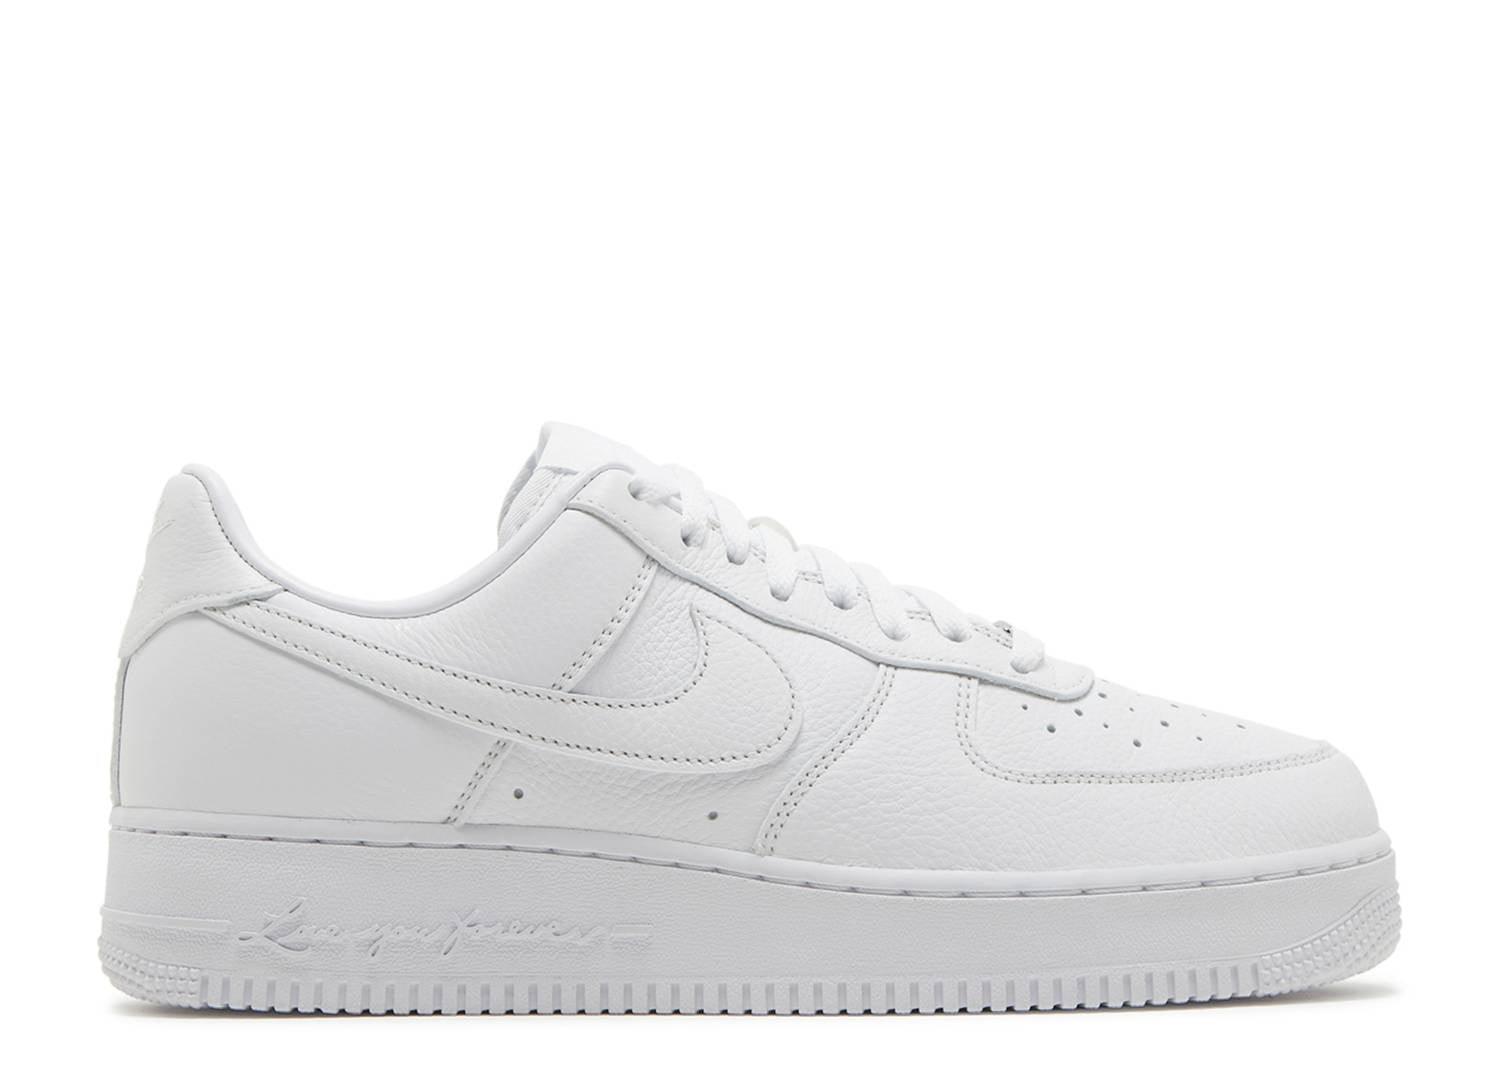 NOCTA X NIKE AIR FORCE 1 LOW “CERTIFIED LOVER BOY” – ENDLESS